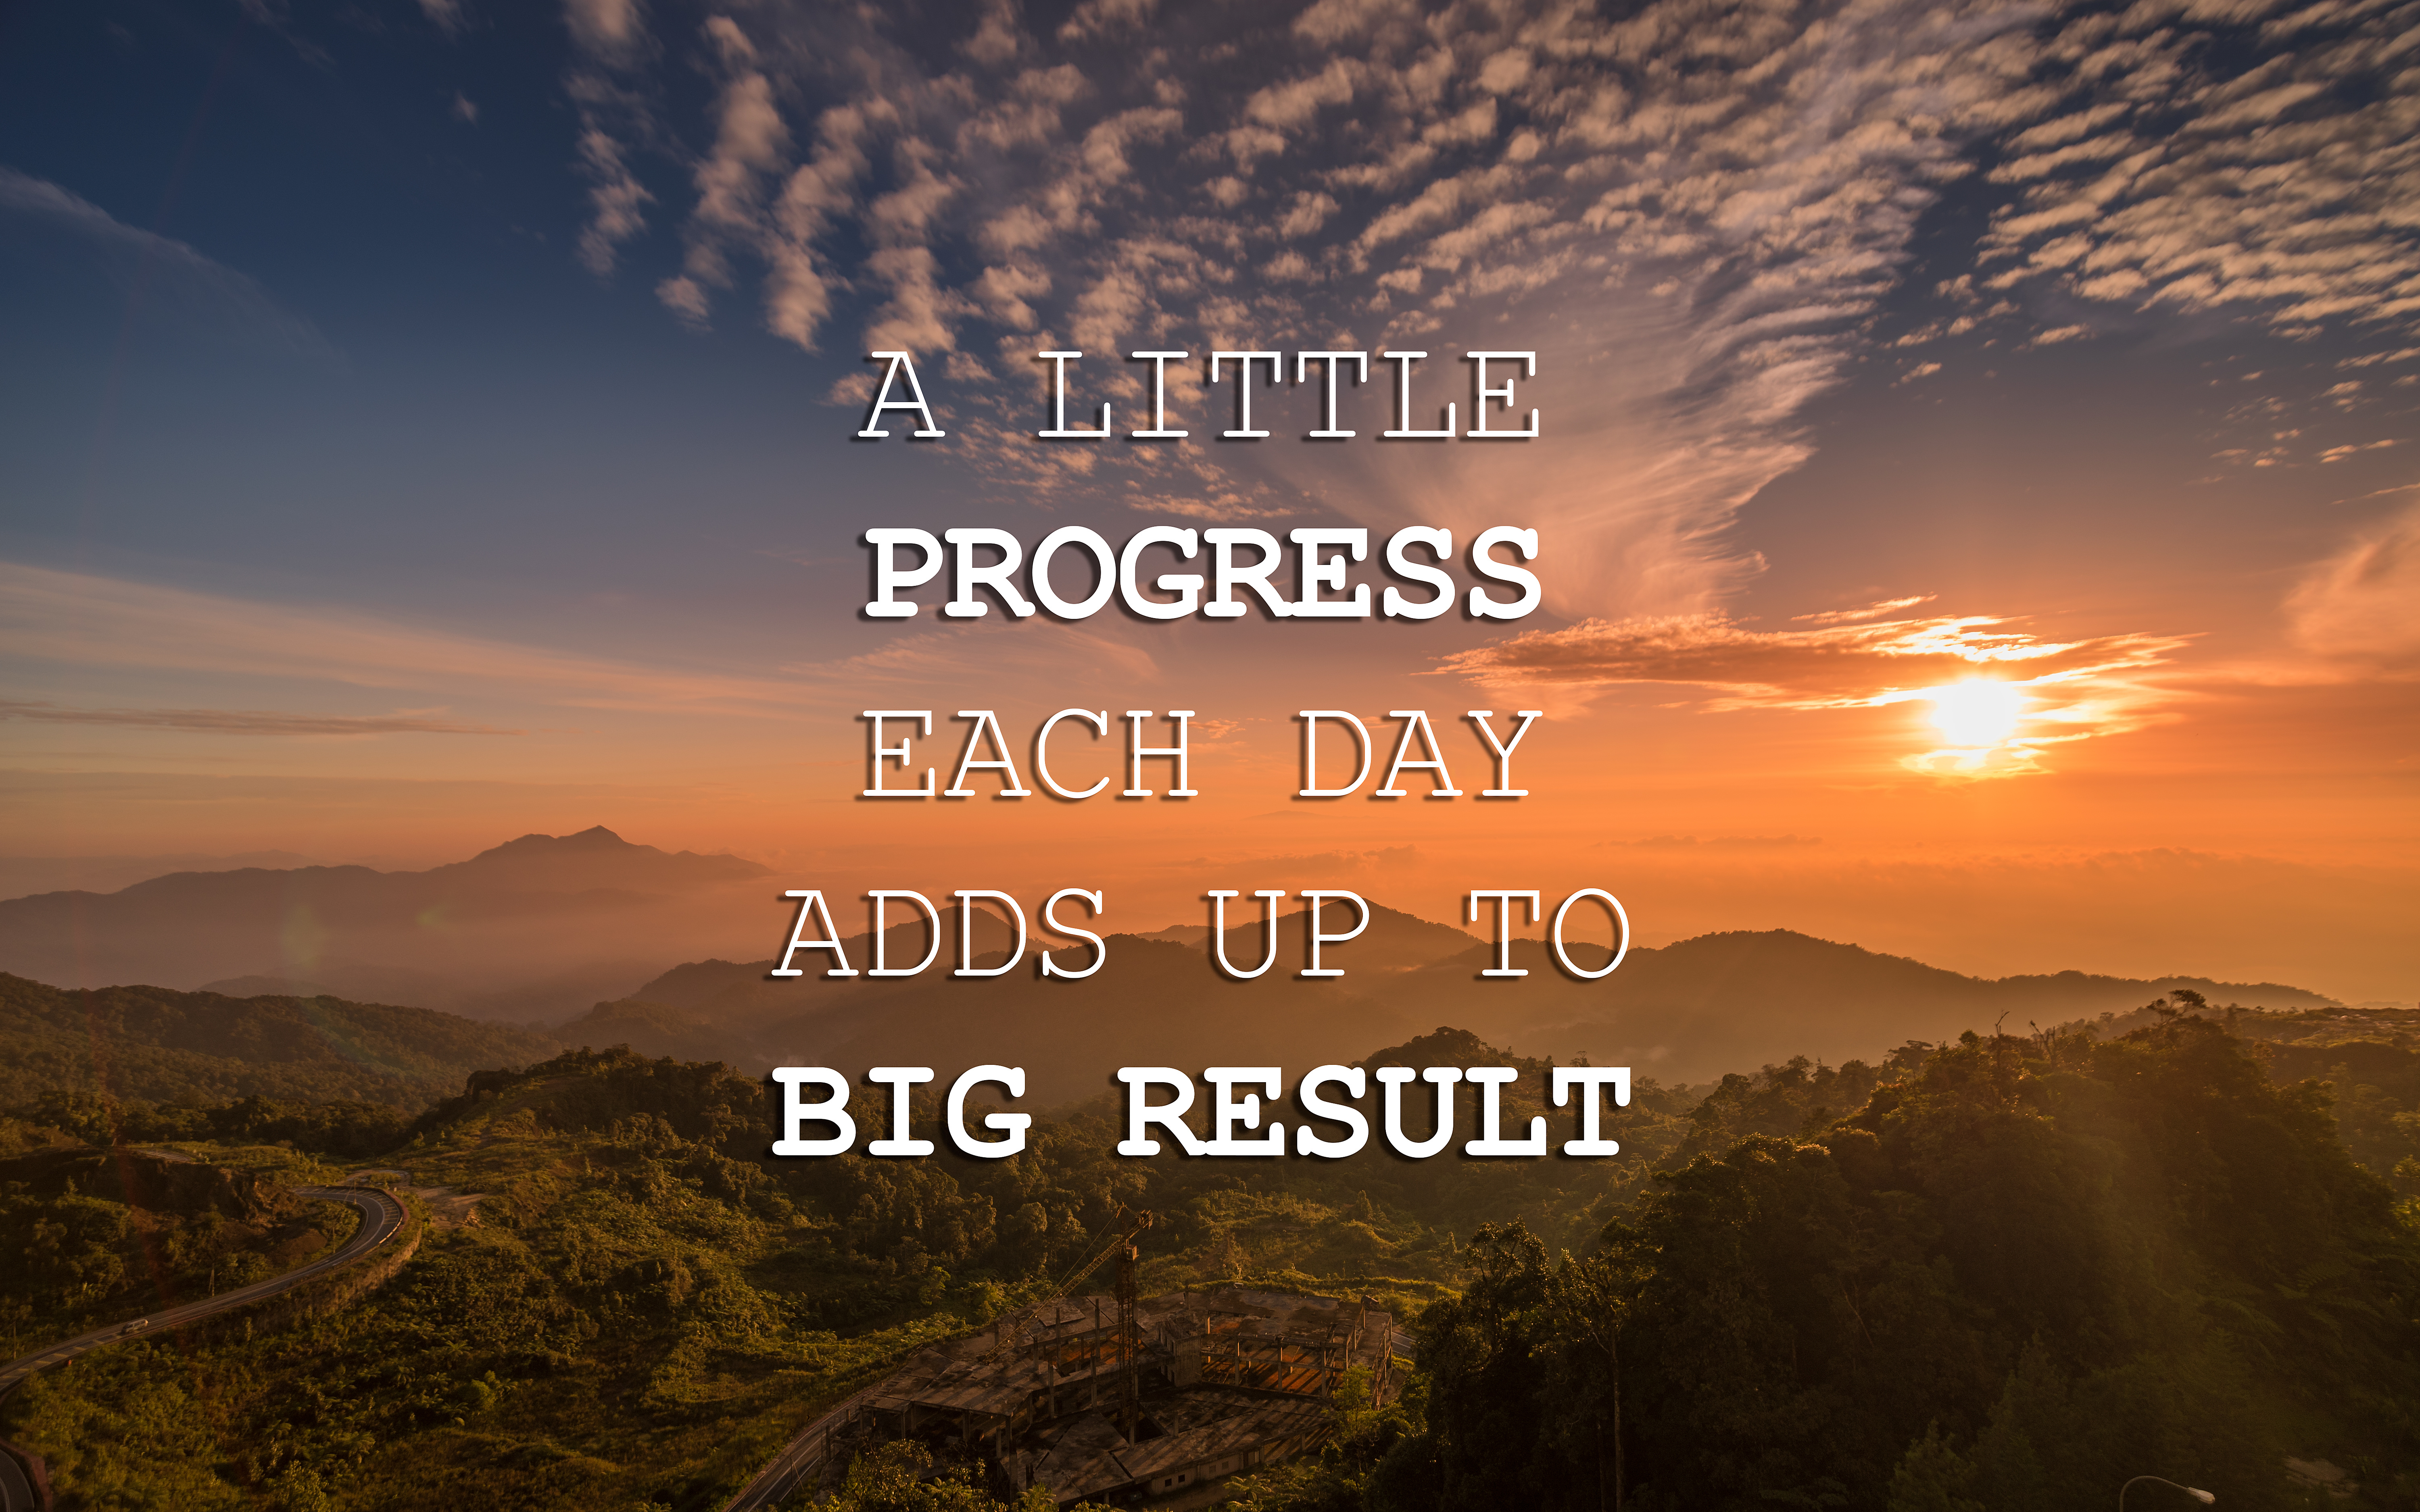 Motivational and inspirational quote - A little progress each day adds up to big result.